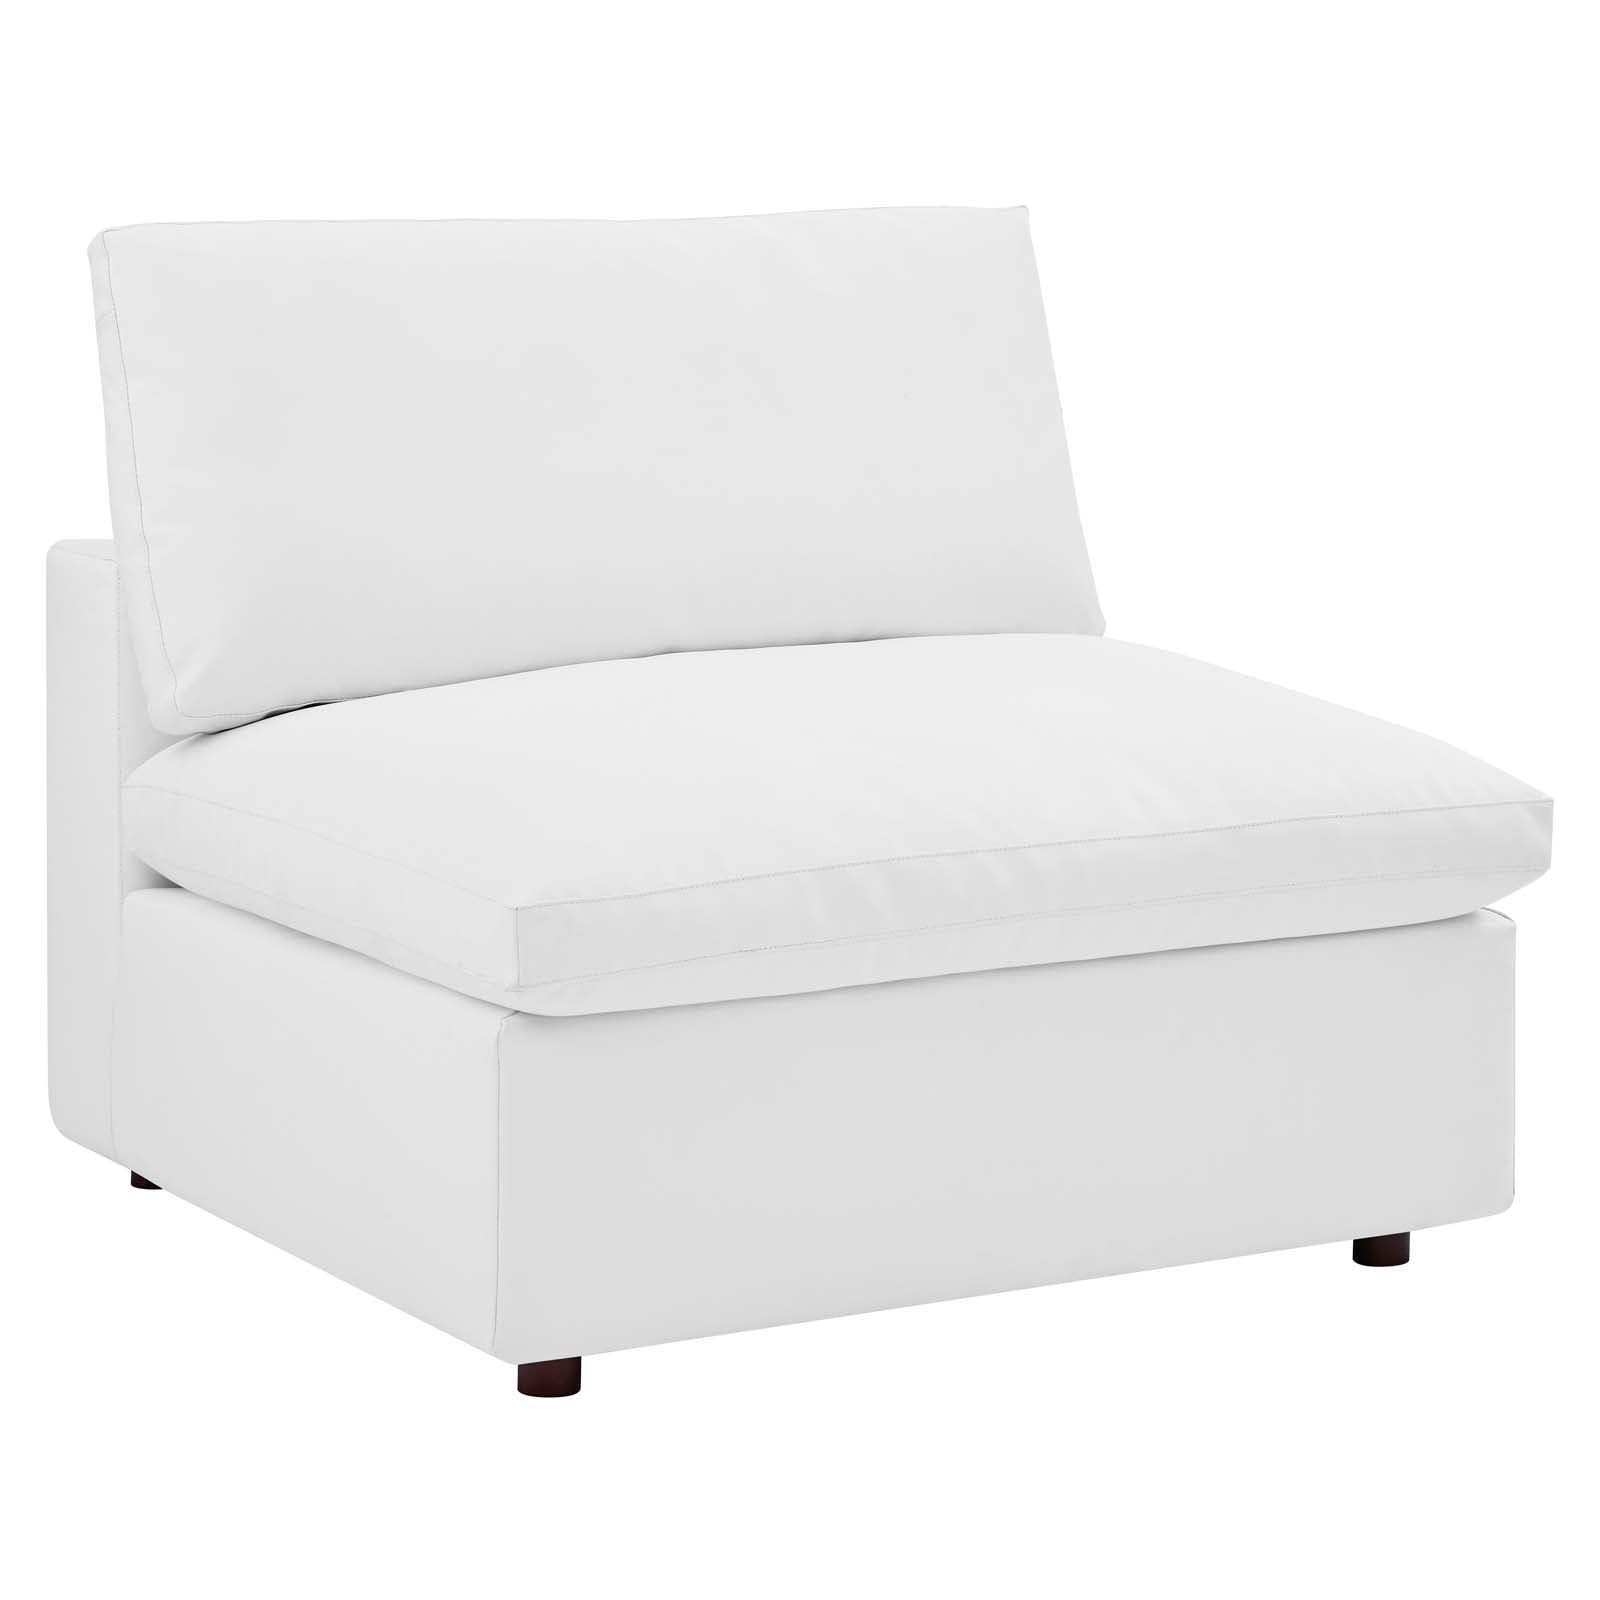 Modway Sectional Sofas - Commix Down Filled Overstuffed Vegan Leather 6 Pieces Sectional Sofa White